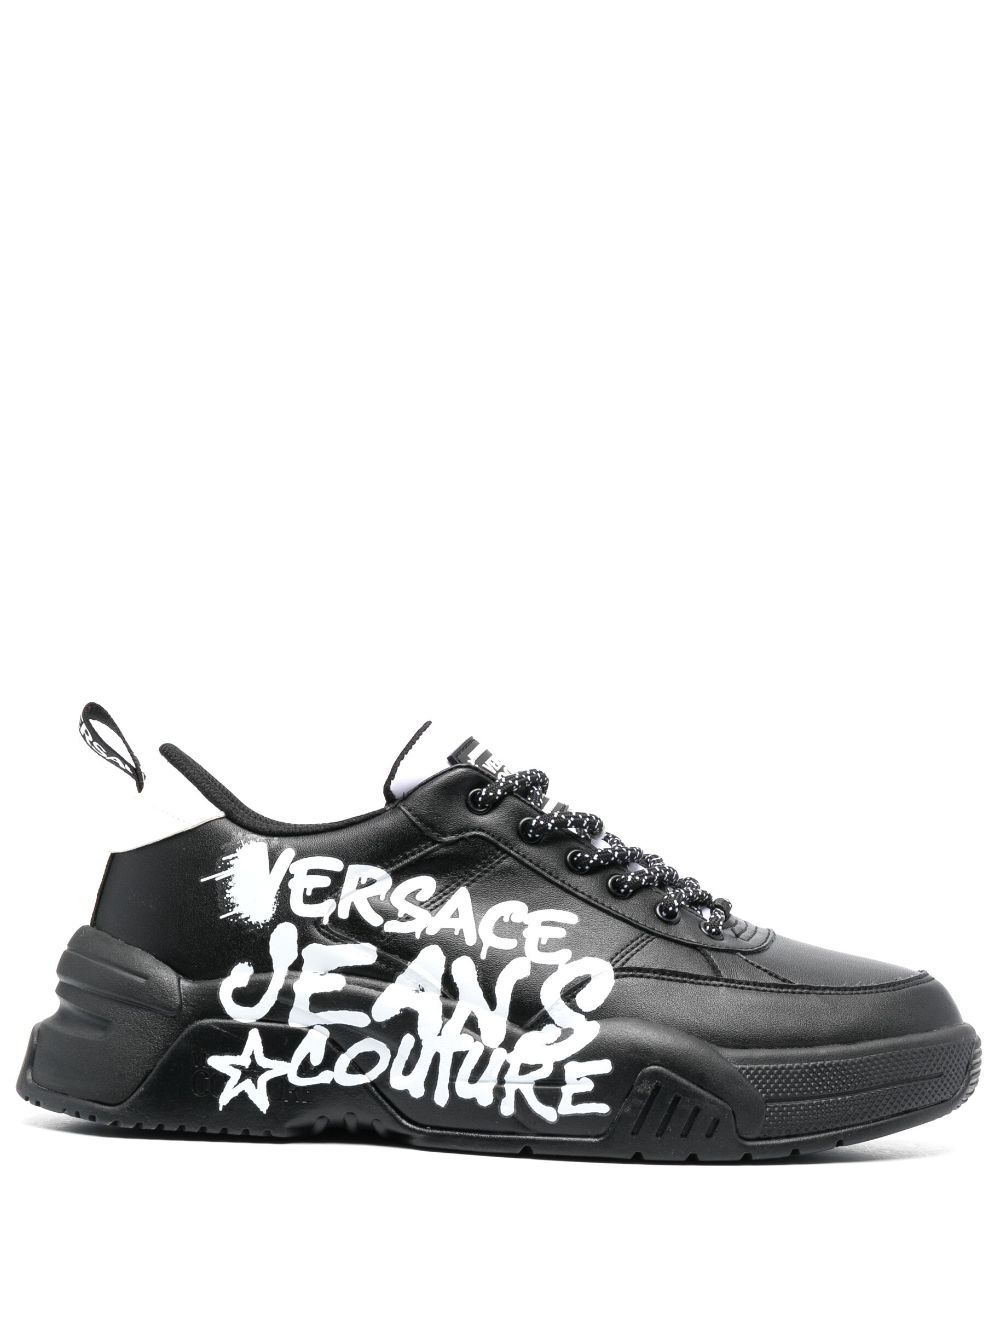 Versace Jeans Couture graffiti-print low-top Sneakers - Farfetch